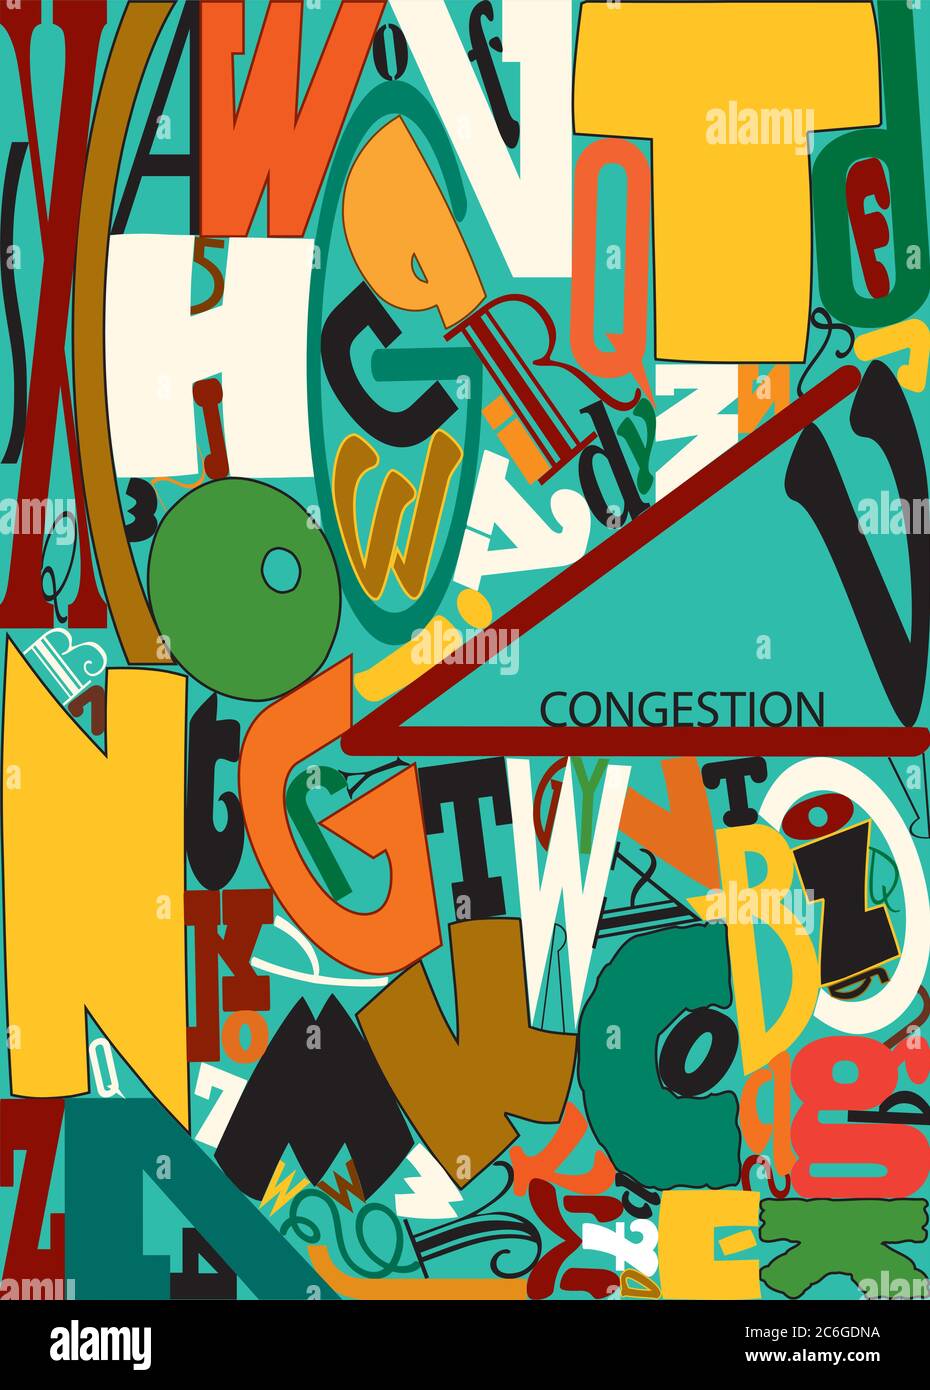 Vector illustration showing a stylized depiction of congestion using different sizes, font styles and colors of letters smashed together. Stock Vector